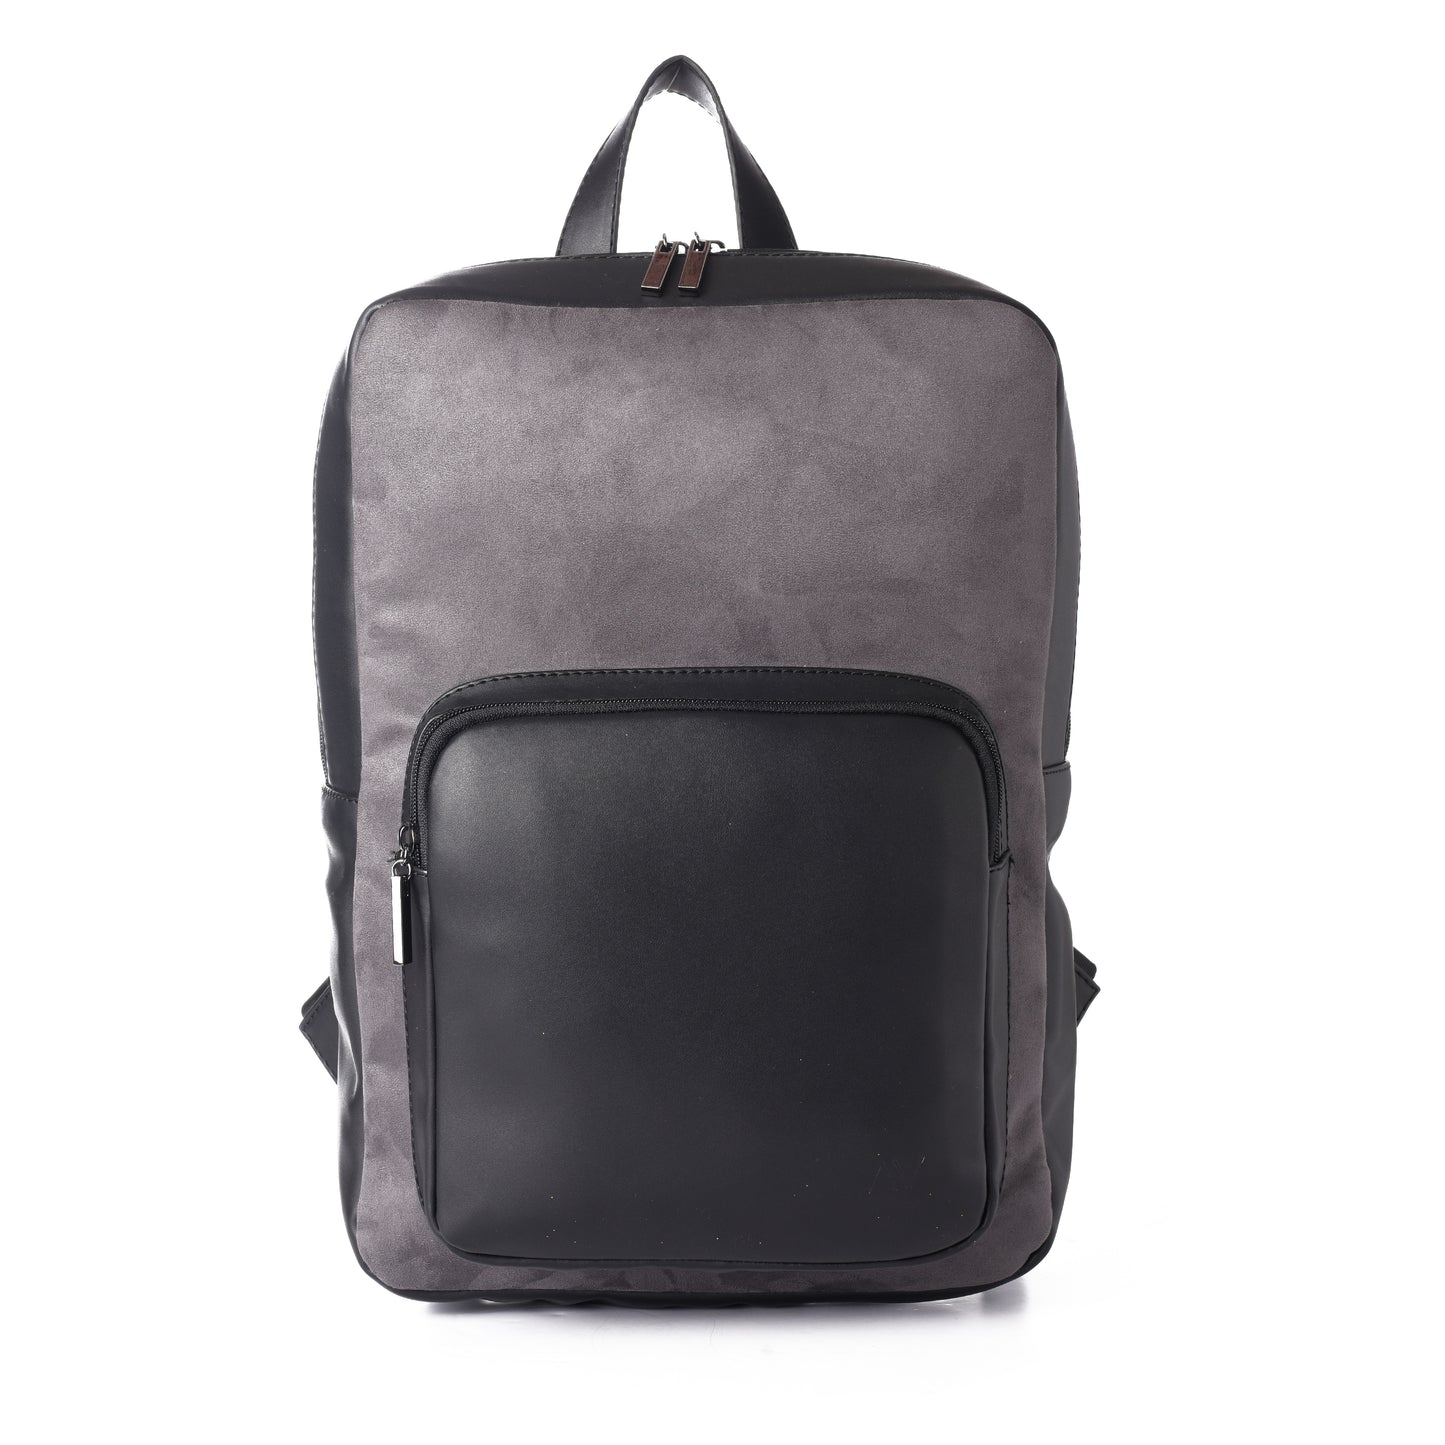 Laptop black with grey suede Backpack